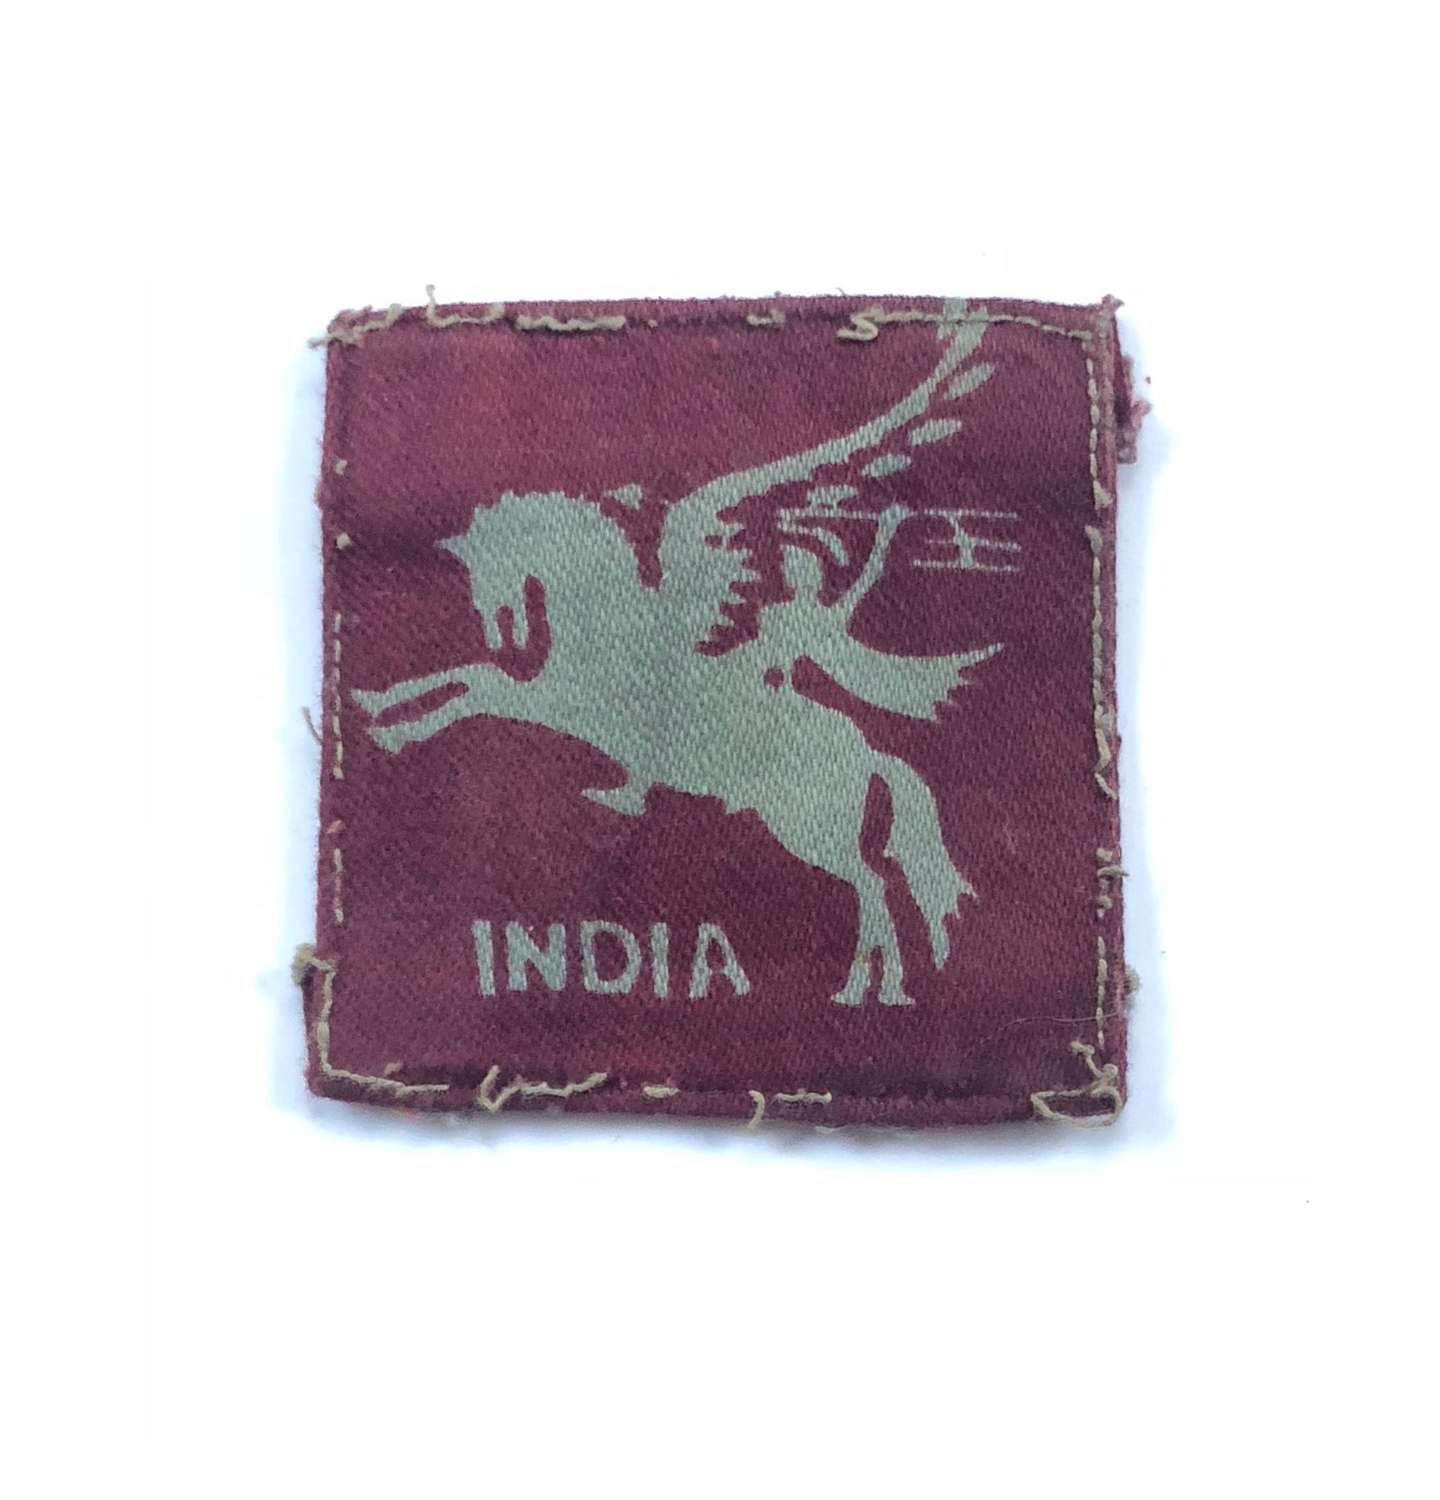 WW2 44th Indian Airborne Division WW2 Printed Formation Badge